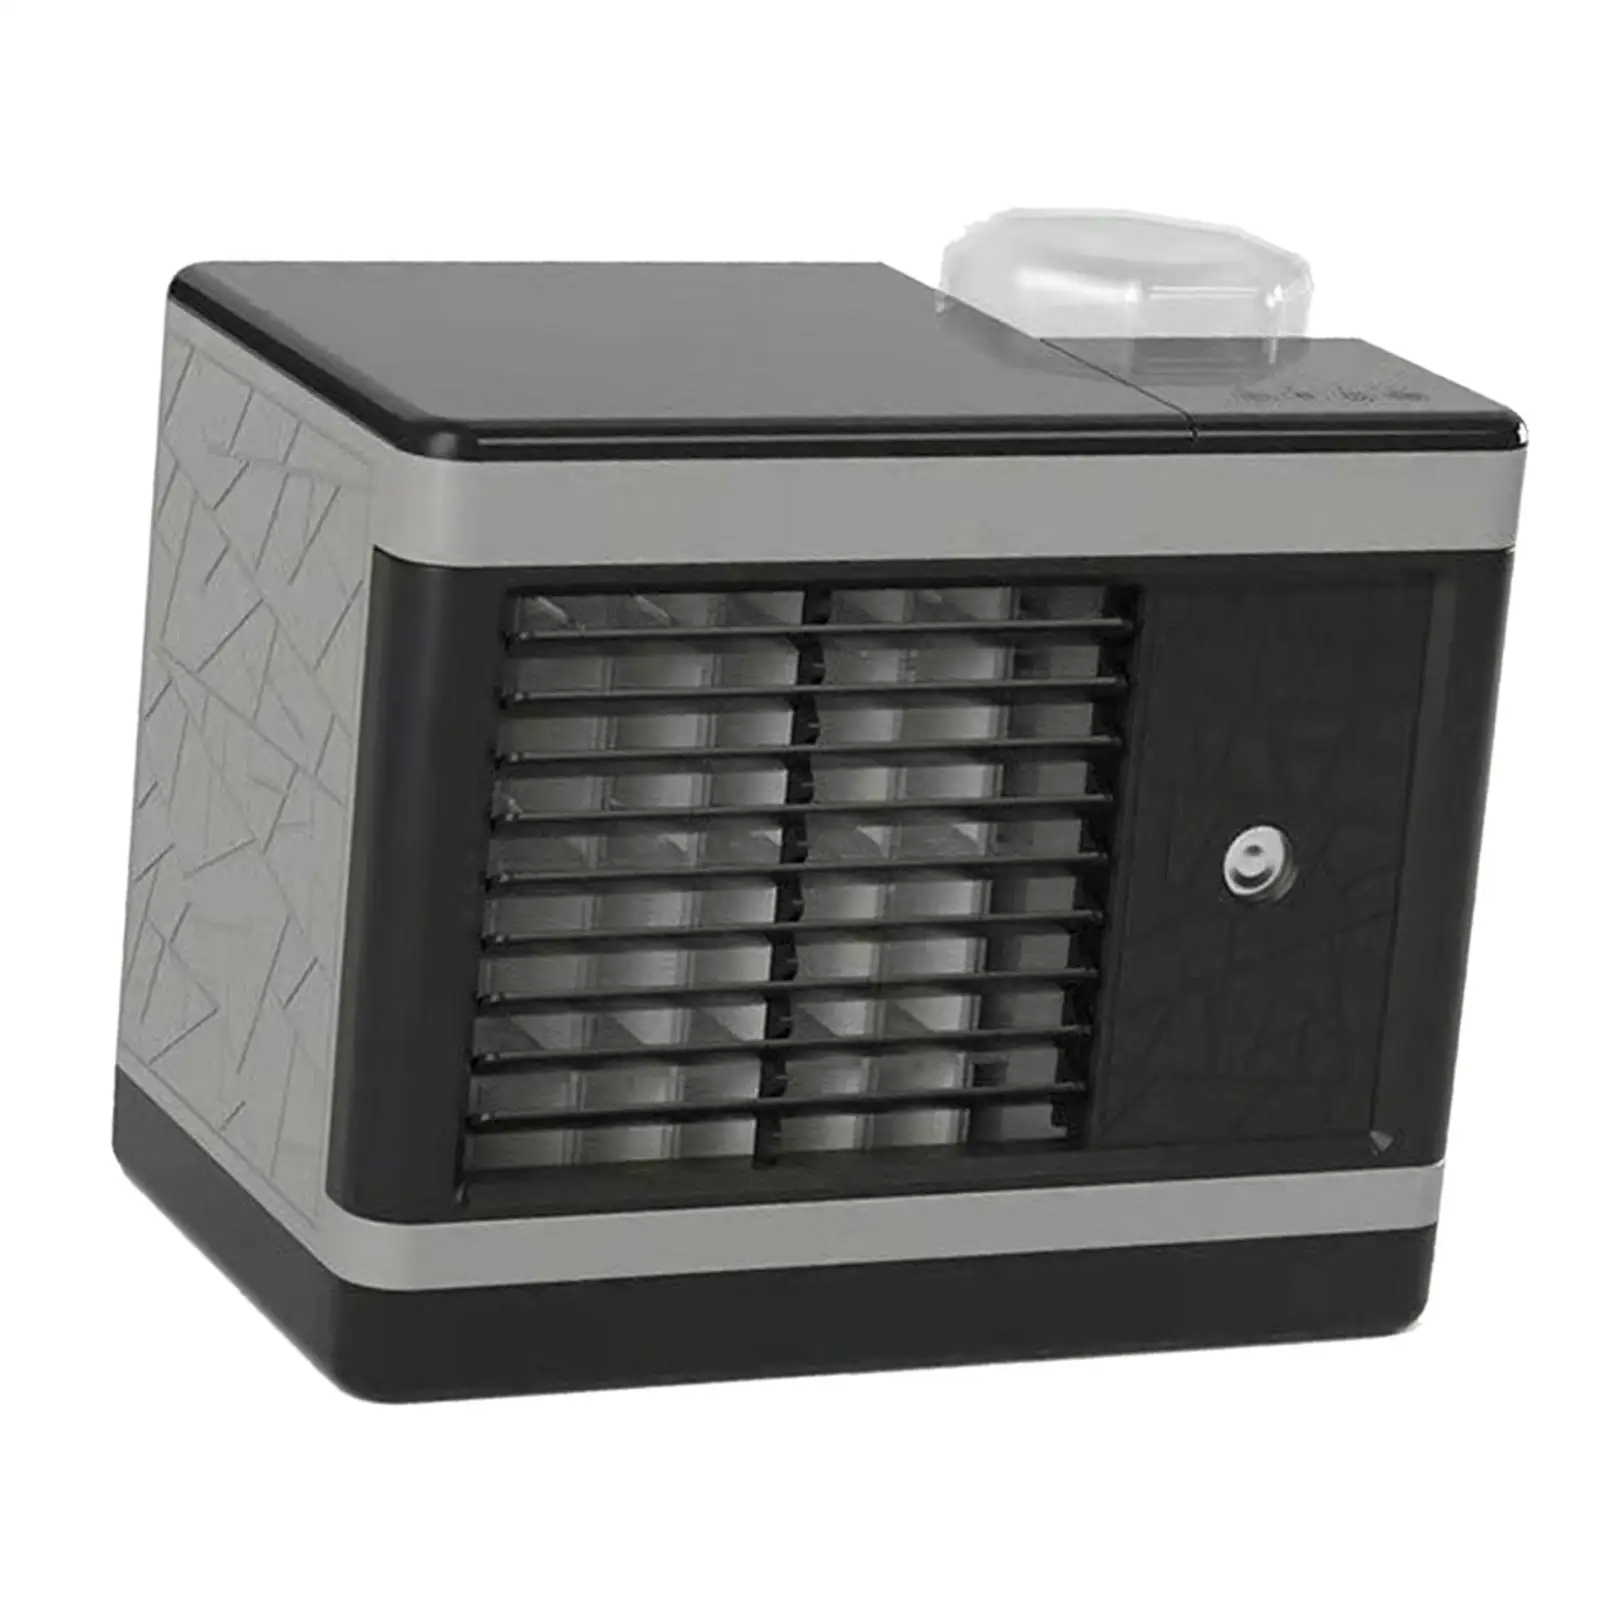 Portable Air Conditioning Fan 3-Speed Mini Air Conditioner Anion Purifier Humidifier Desktop USB Air Cooling Fan Air Cooler